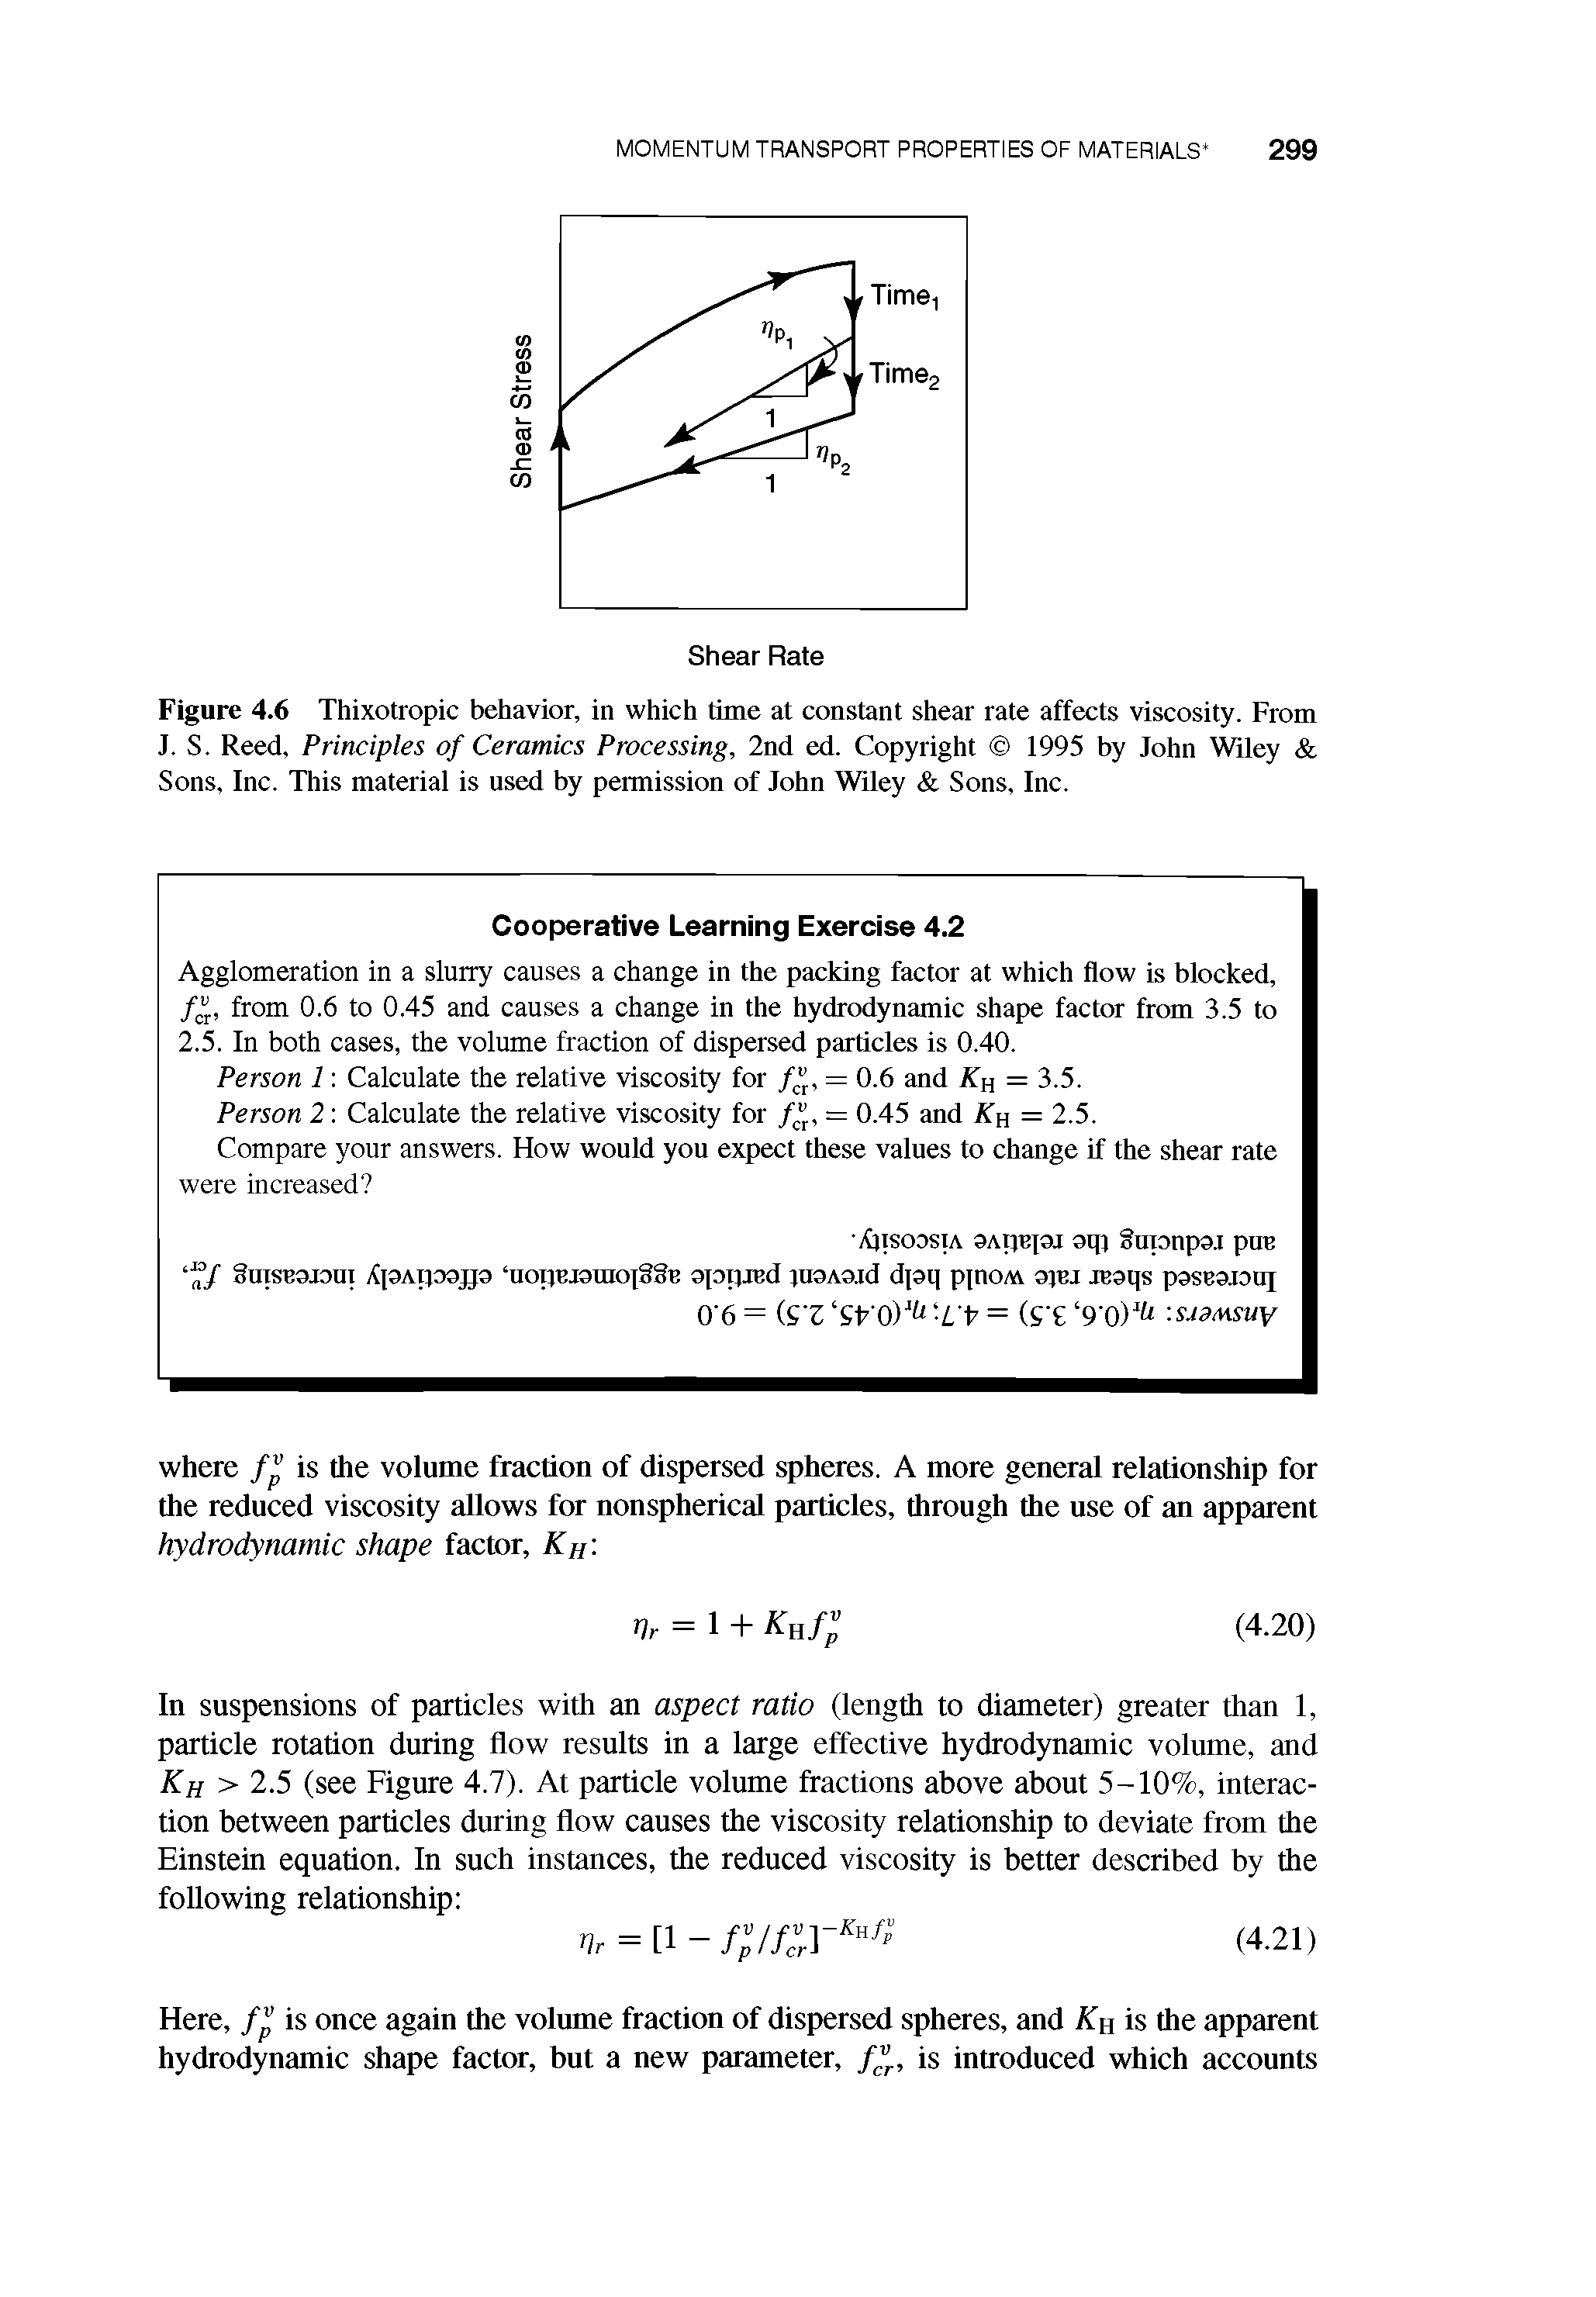 Figure 4.6 Thixotropic behavior, in which time at constant shear rate affects viscosity. From J. S. Reed, Principles of Ceramics Processing, 2nd ed. Copyright 1995 by John Wiley Sons, Inc. This material is used by permission of John Wiley Sons, Inc.